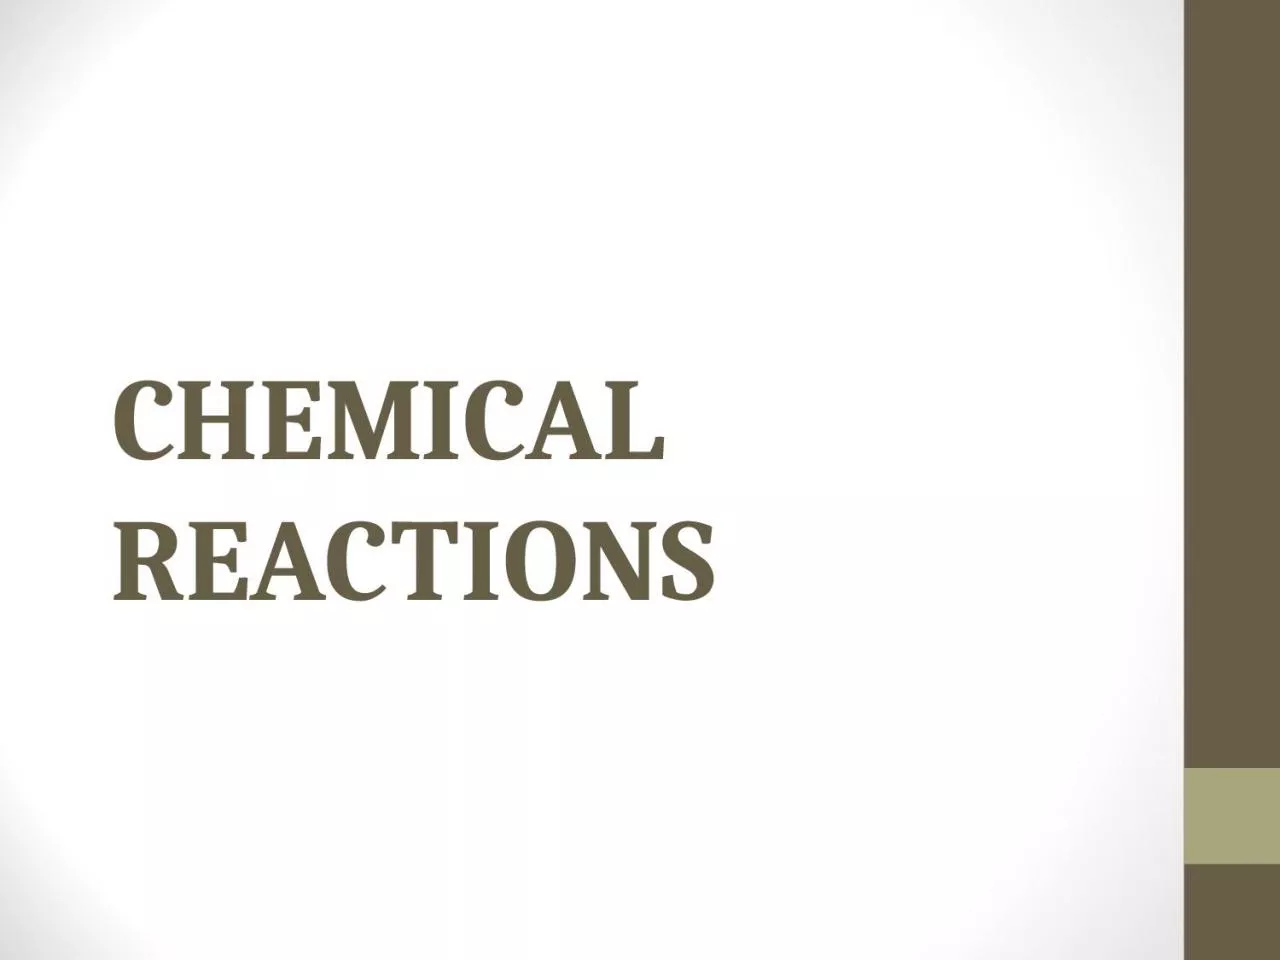 CHEMICAL REACTIONS ENERGY IN CHEMICAL REACTIONS